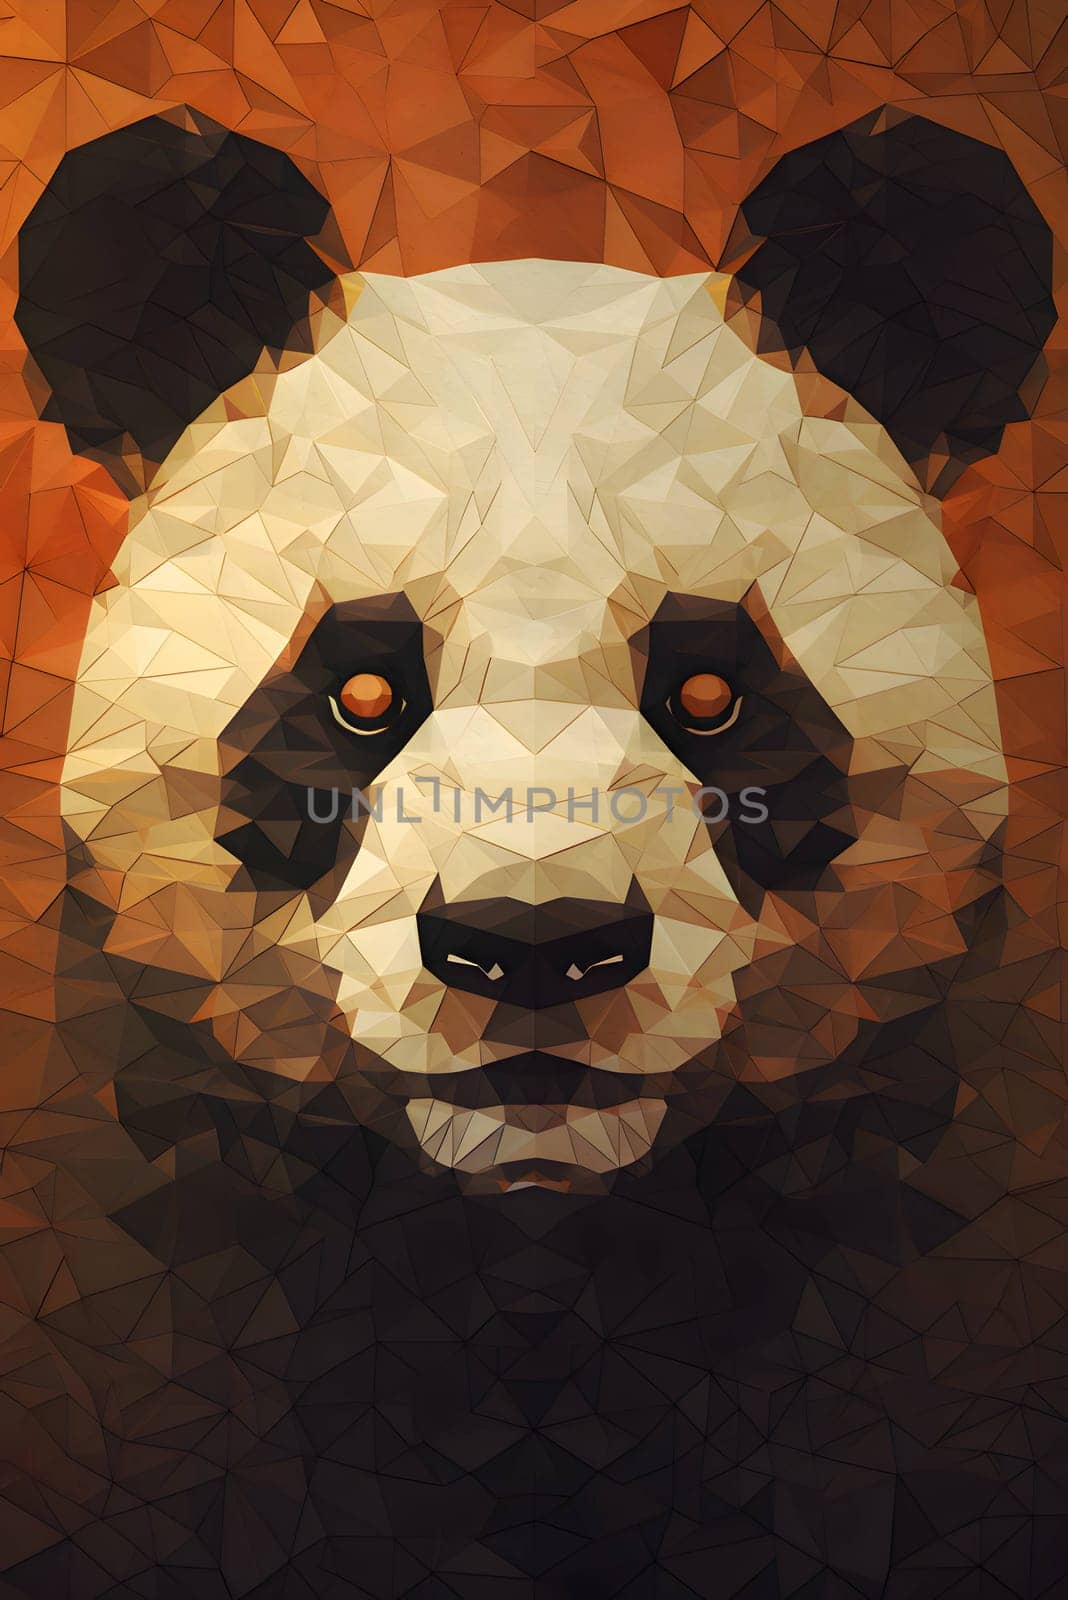 Low poly panda portrait. Polygonal background. Vector illustration. by ThemesS